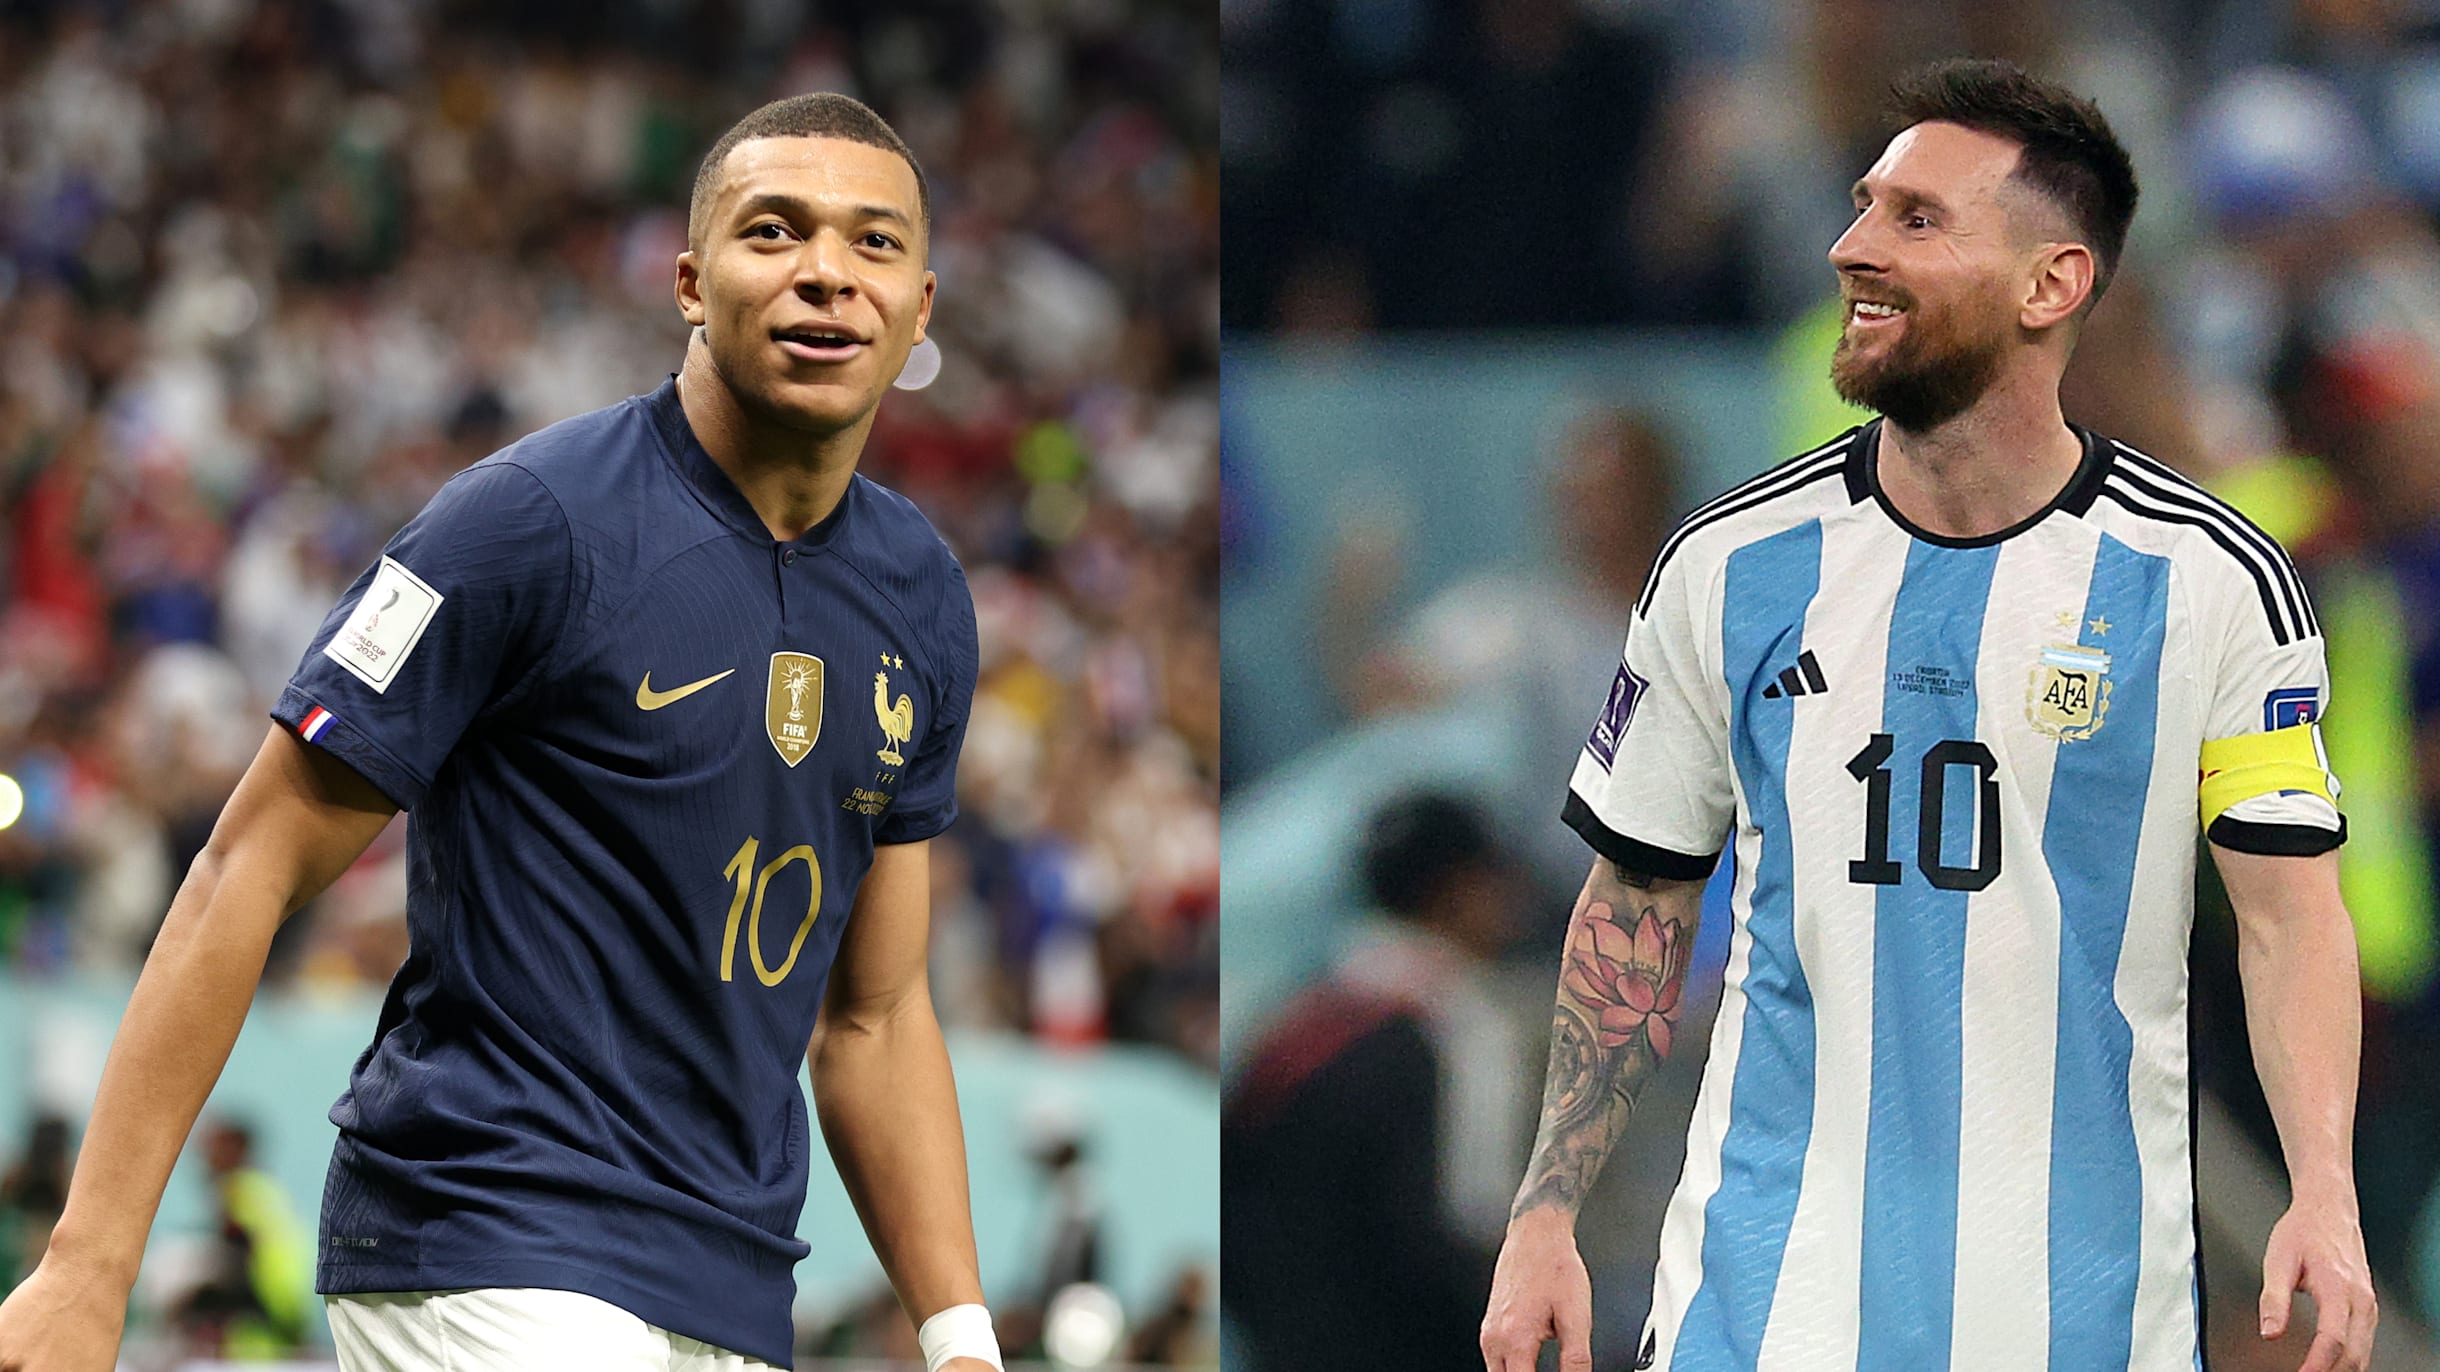 2022 FIFA World Cup final Argentina vs France Preview, schedule and stars to watch